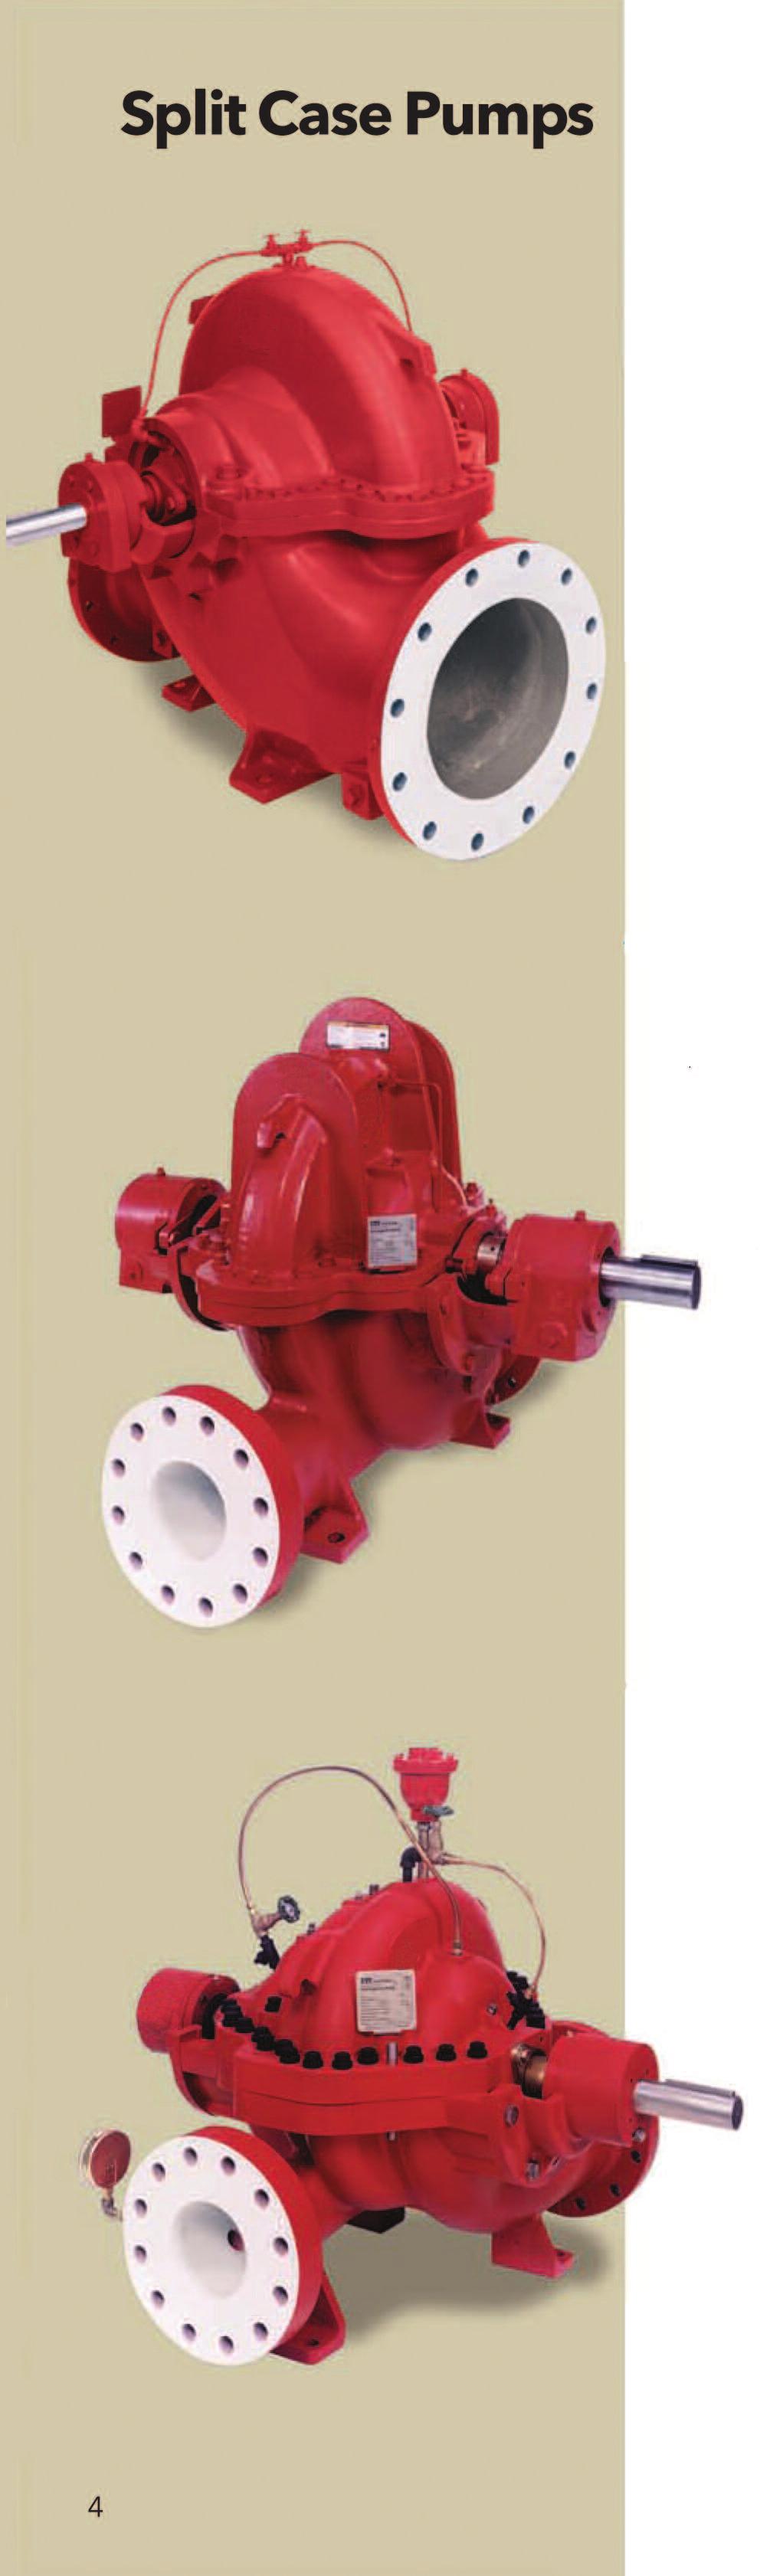 8100 Series Capacity to 3000 GPM (11,3 L/min) Pressures to 2 PSI (179 m) Working Pressures up to 20 PSI (17 m) with 12 lb. A.S.A. flanges up to 37 PSI (24 m) with 20 lb. A.S.A. flanges n Space saving design.